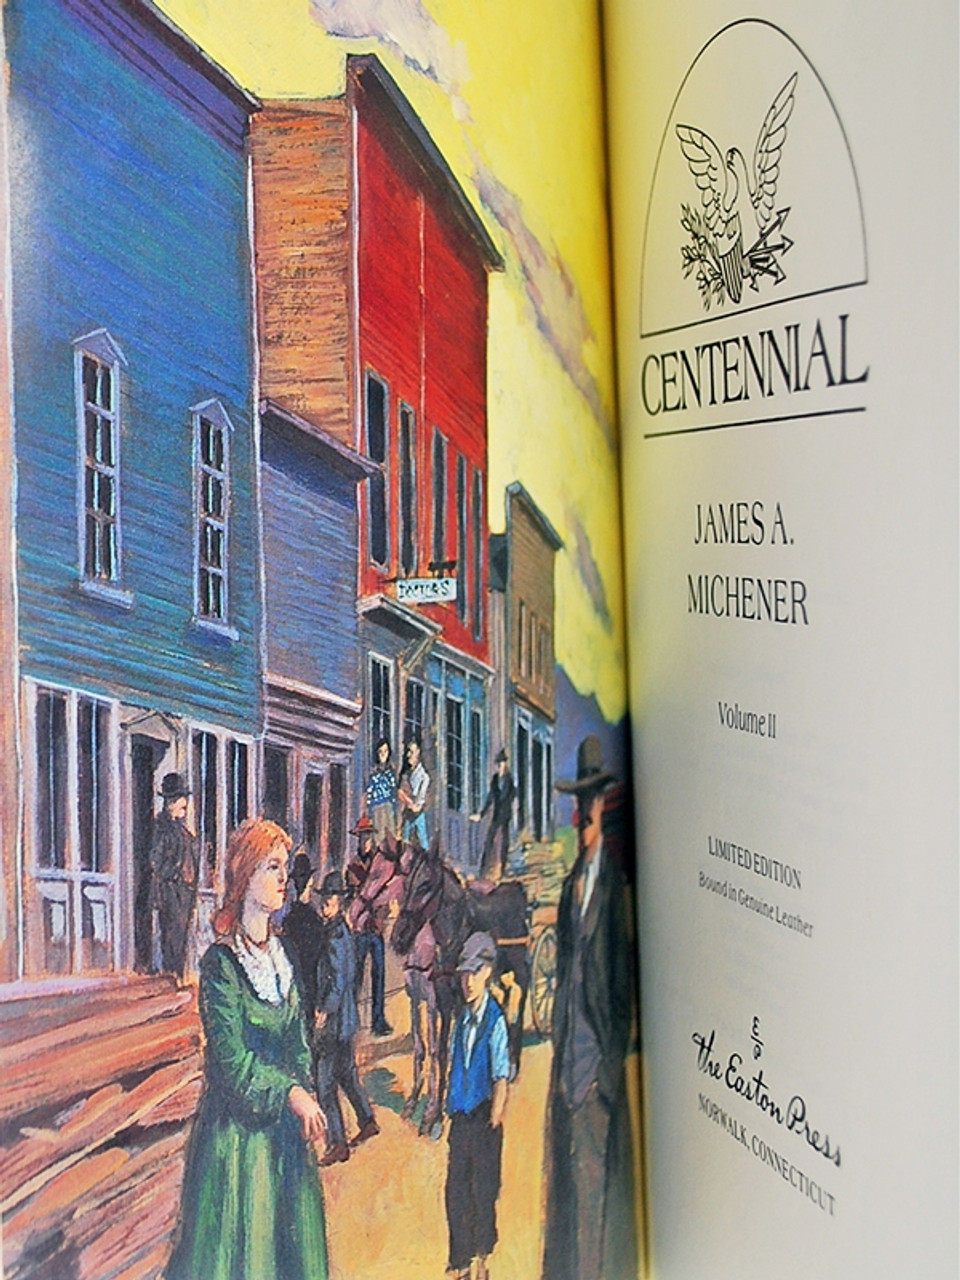 James Michener  "Centennial" Leather Bound Collector's Edition, Two Volume Complete Matched Set